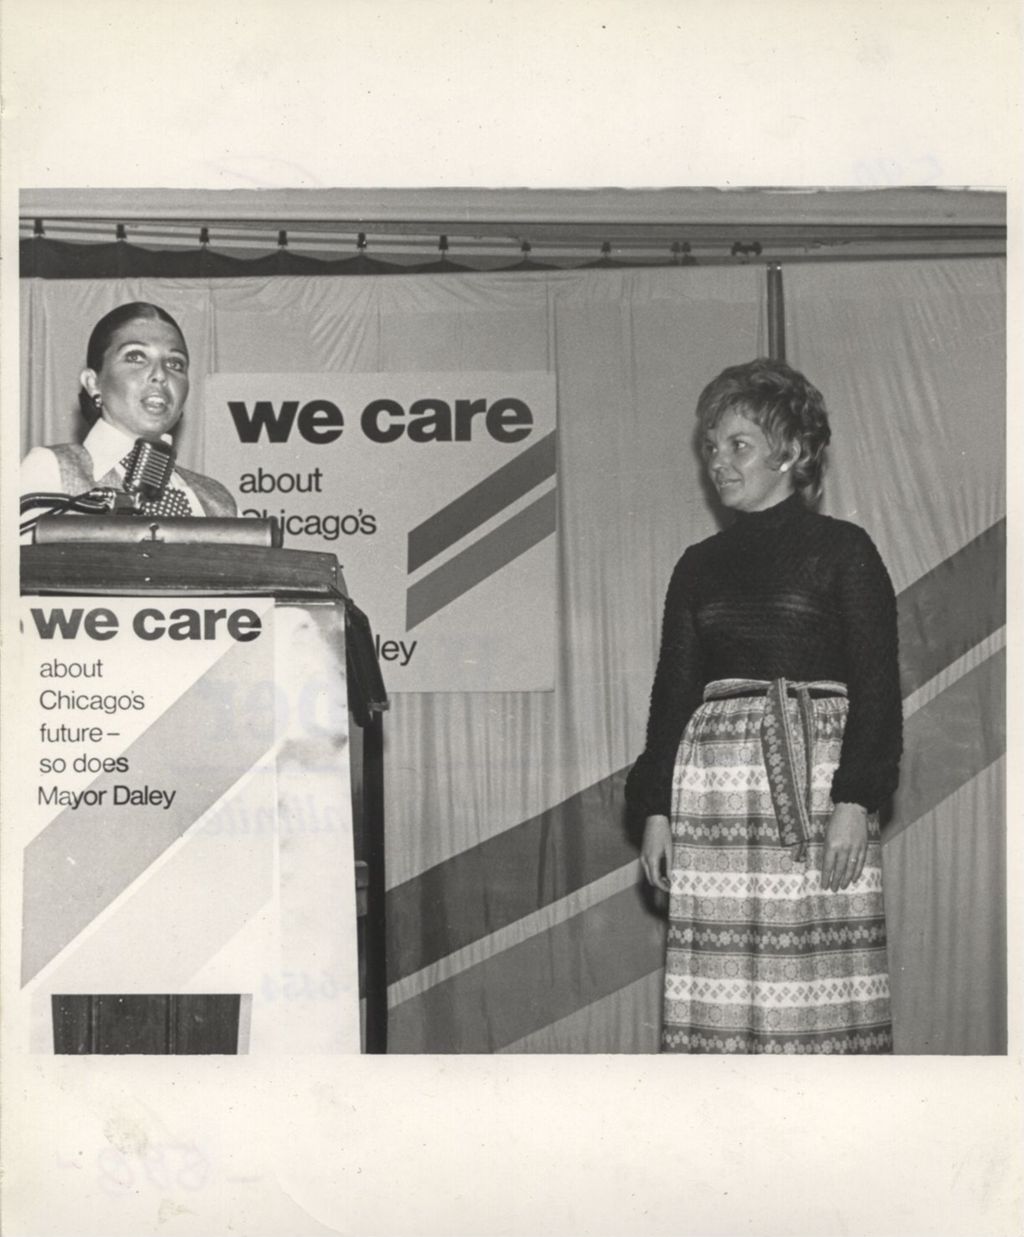 Miniature of Eleanor R. Daley modeling an outfit at a "We Care" event